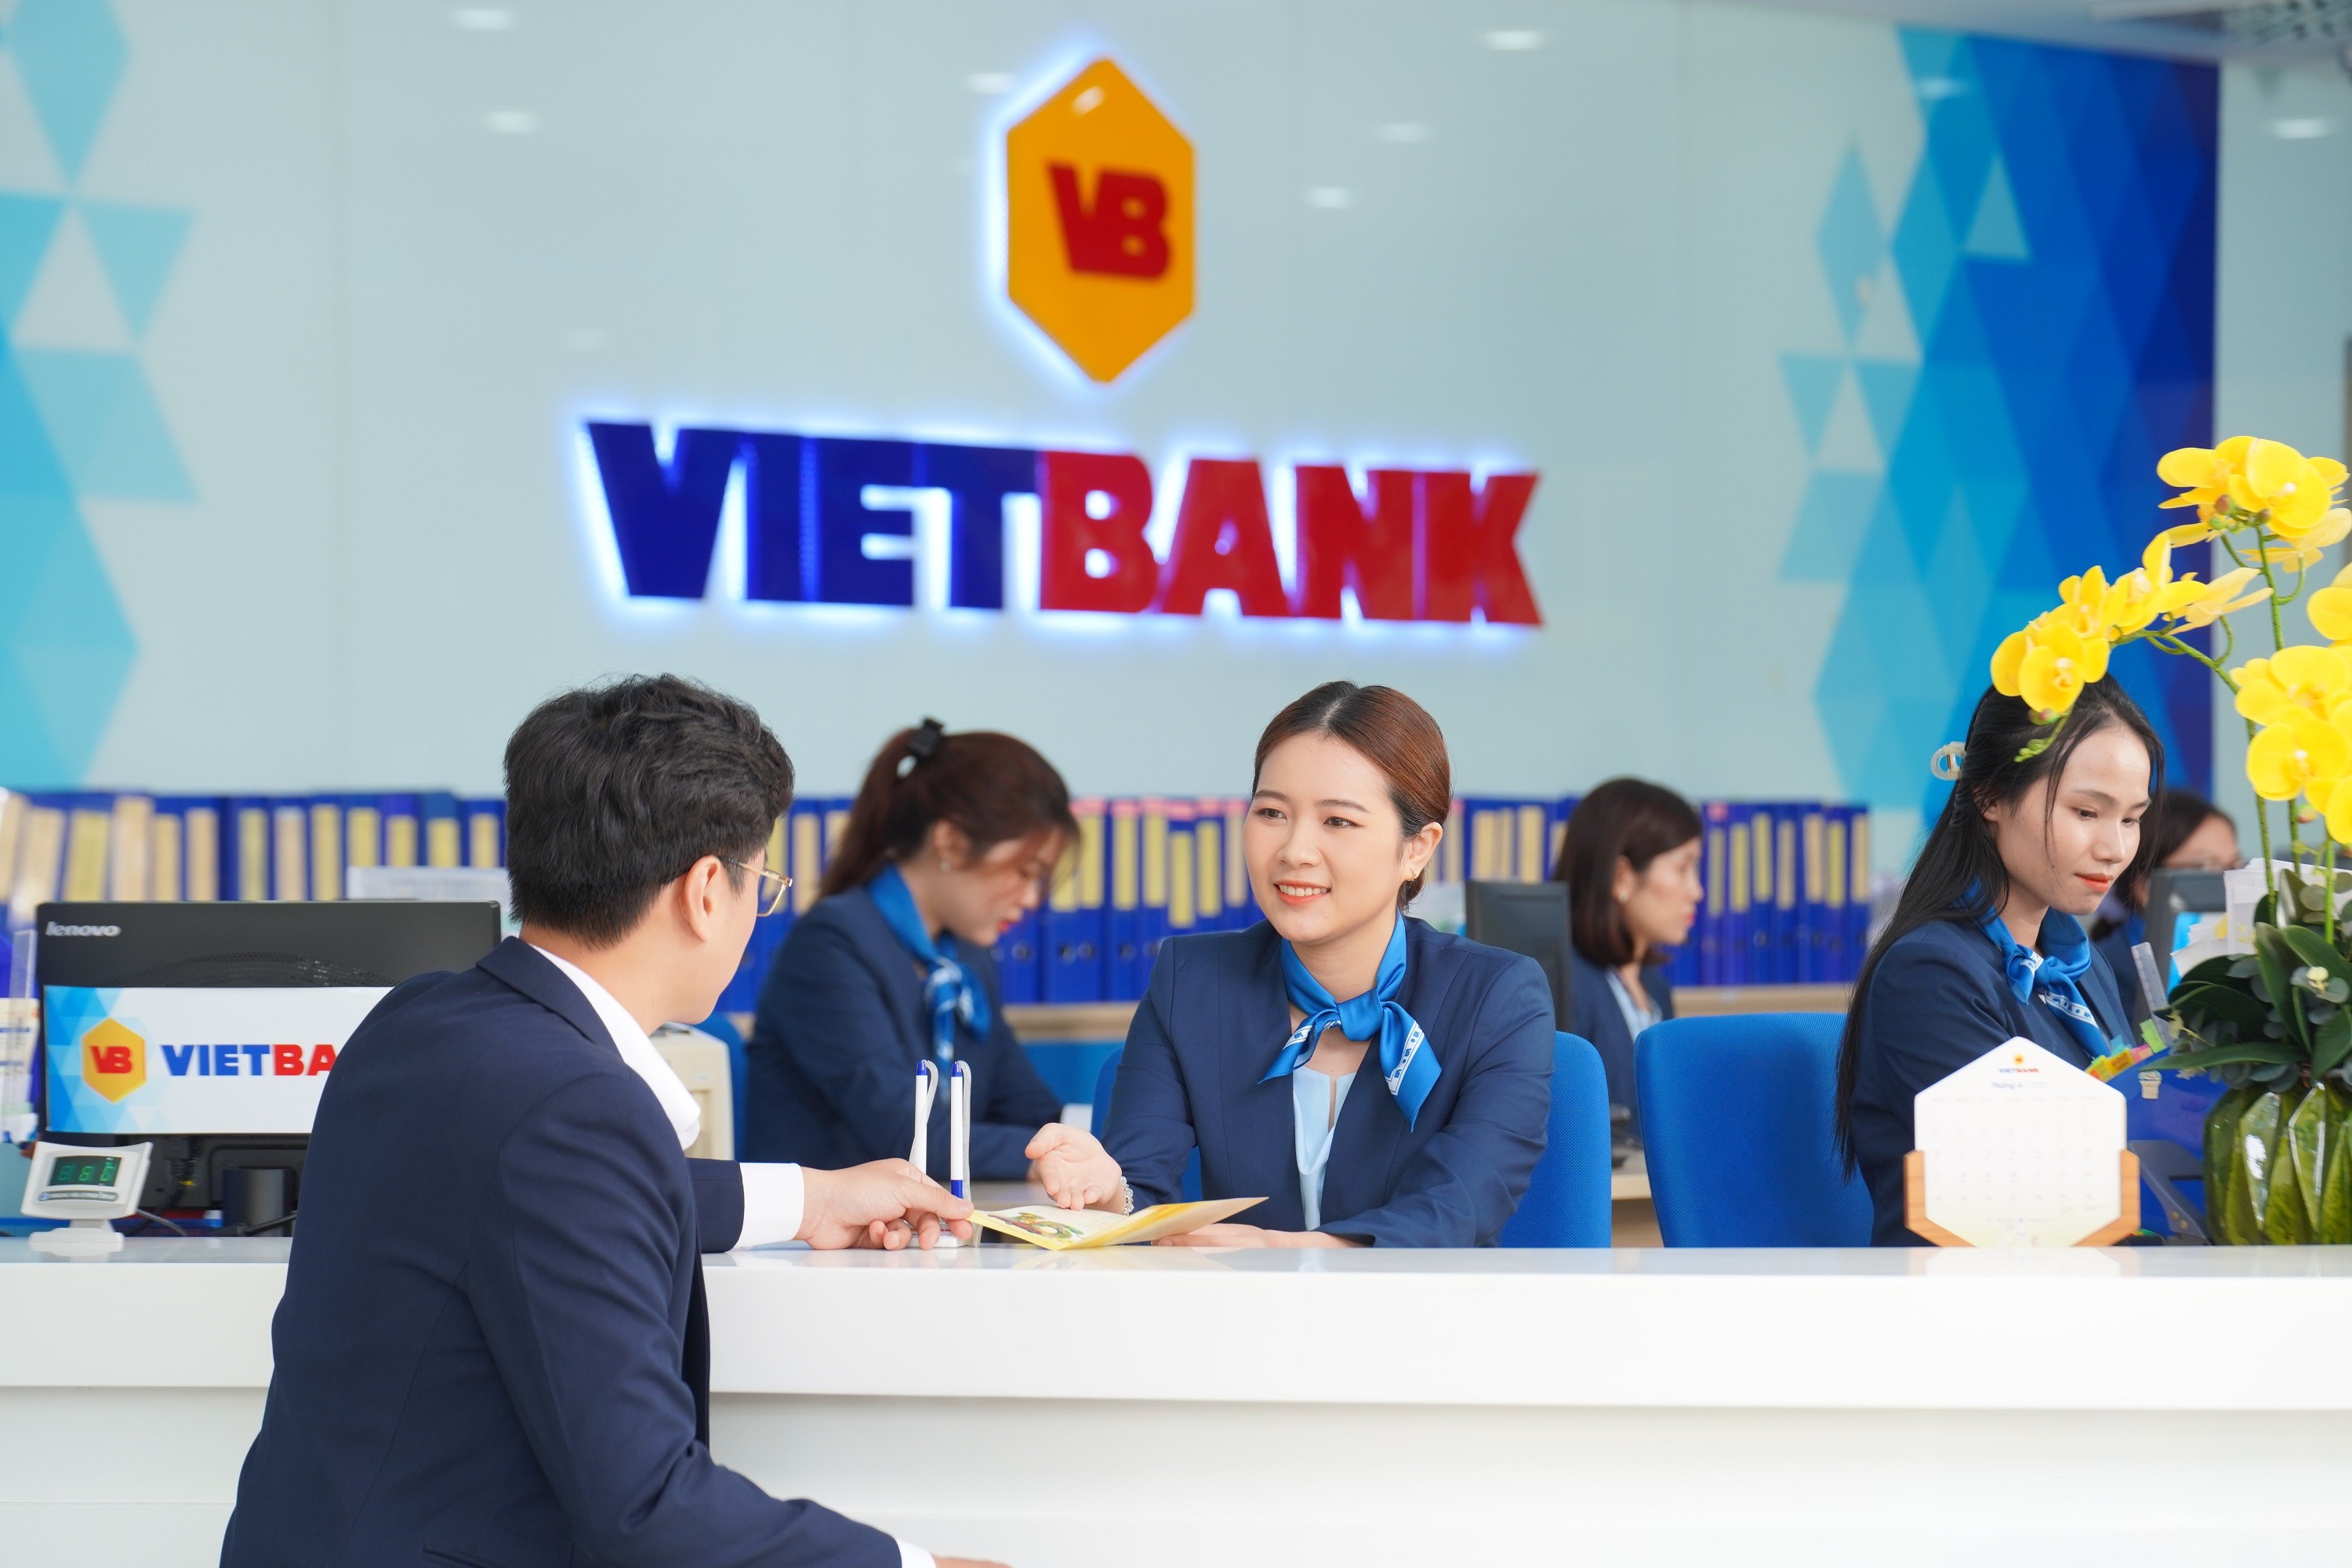 2-vietbank-canh-giao-dich-1682391776.JPG